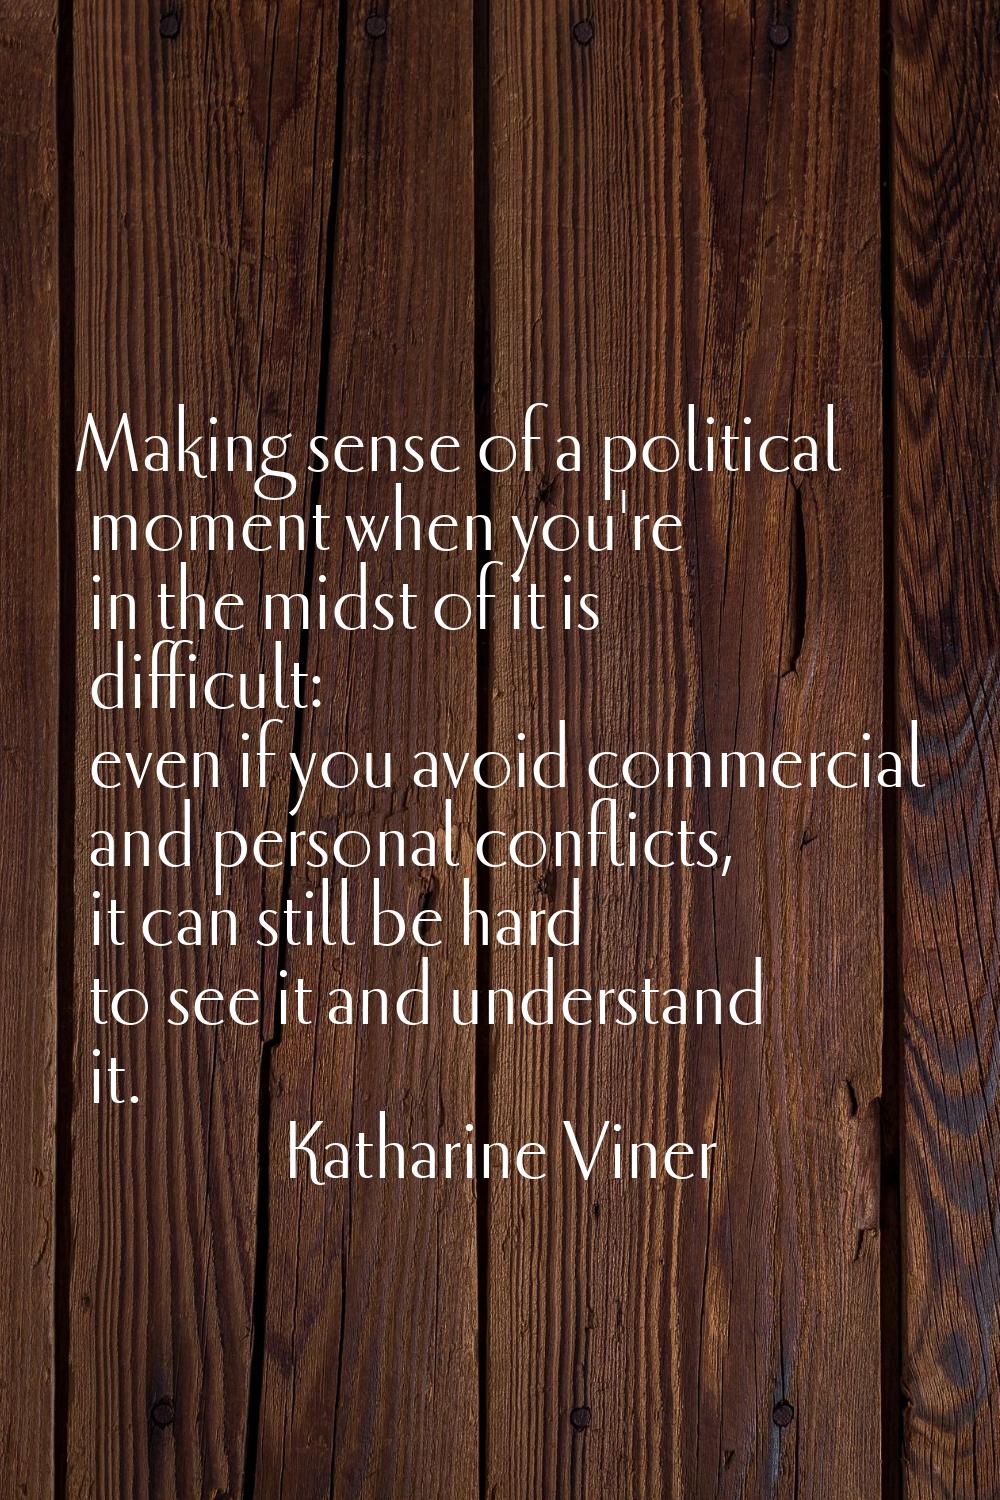 Making sense of a political moment when you're in the midst of it is difficult: even if you avoid c